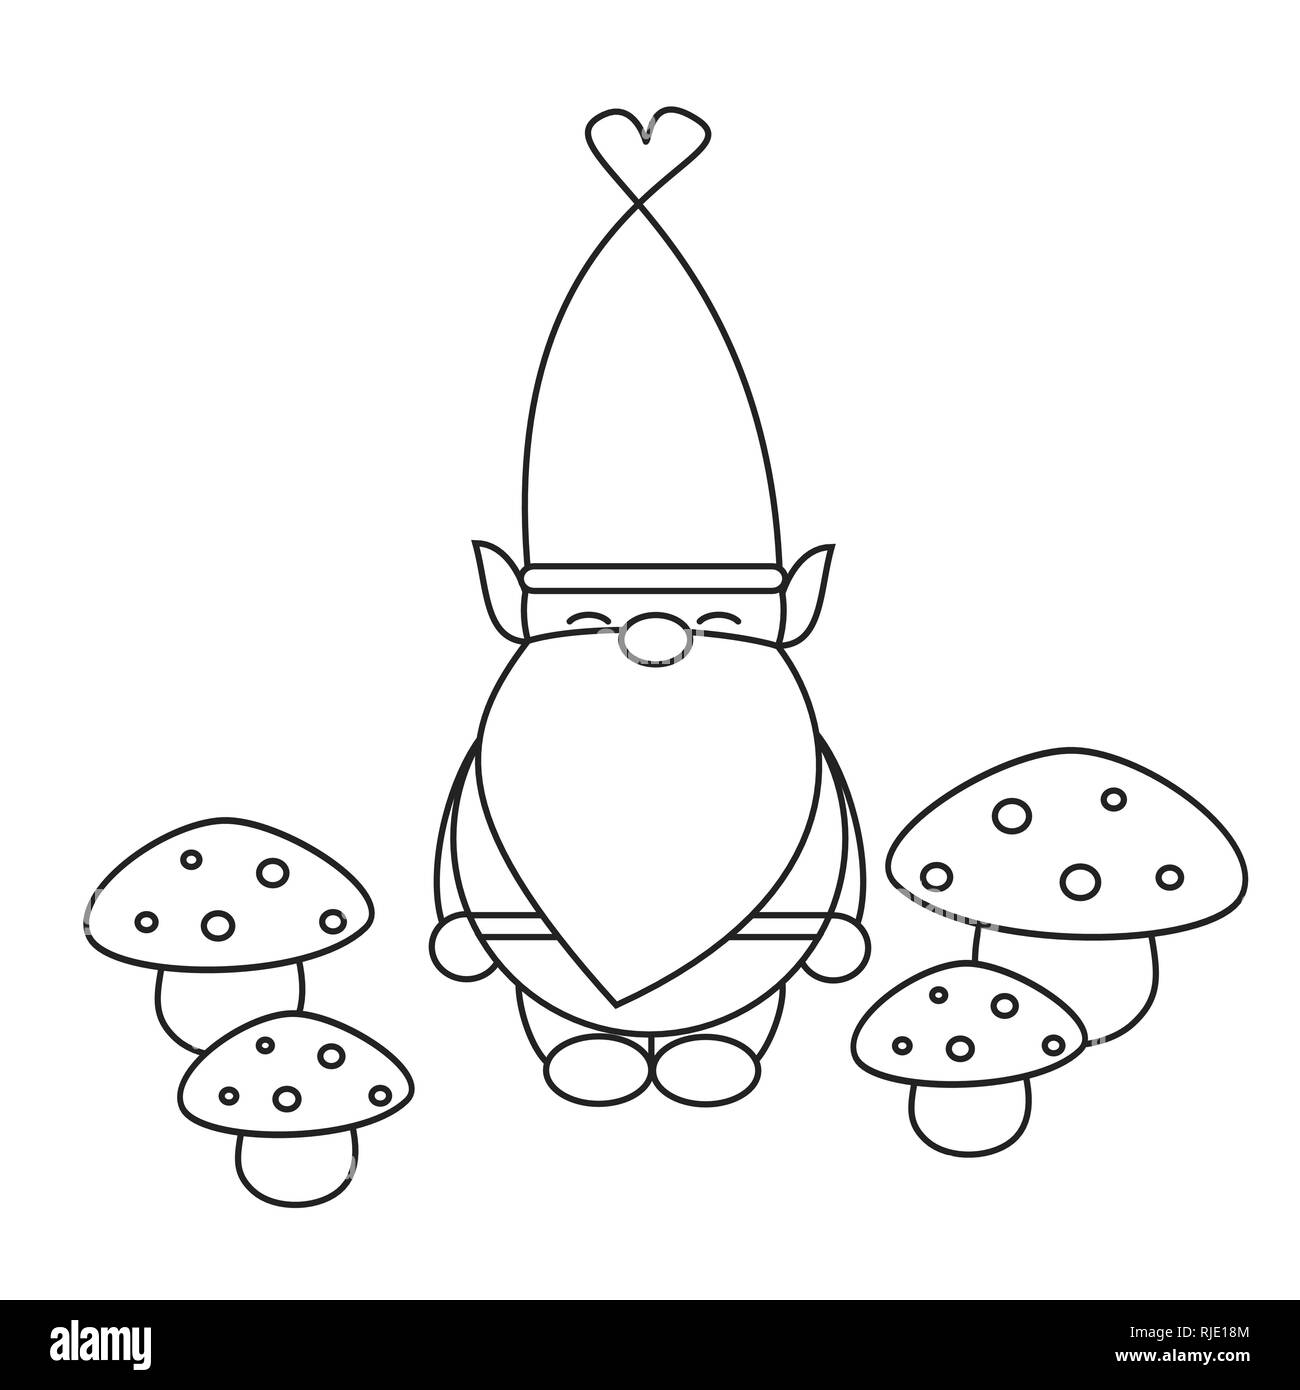 cute cartoon black and white gnome with mushroom for coloring art Stock Vector